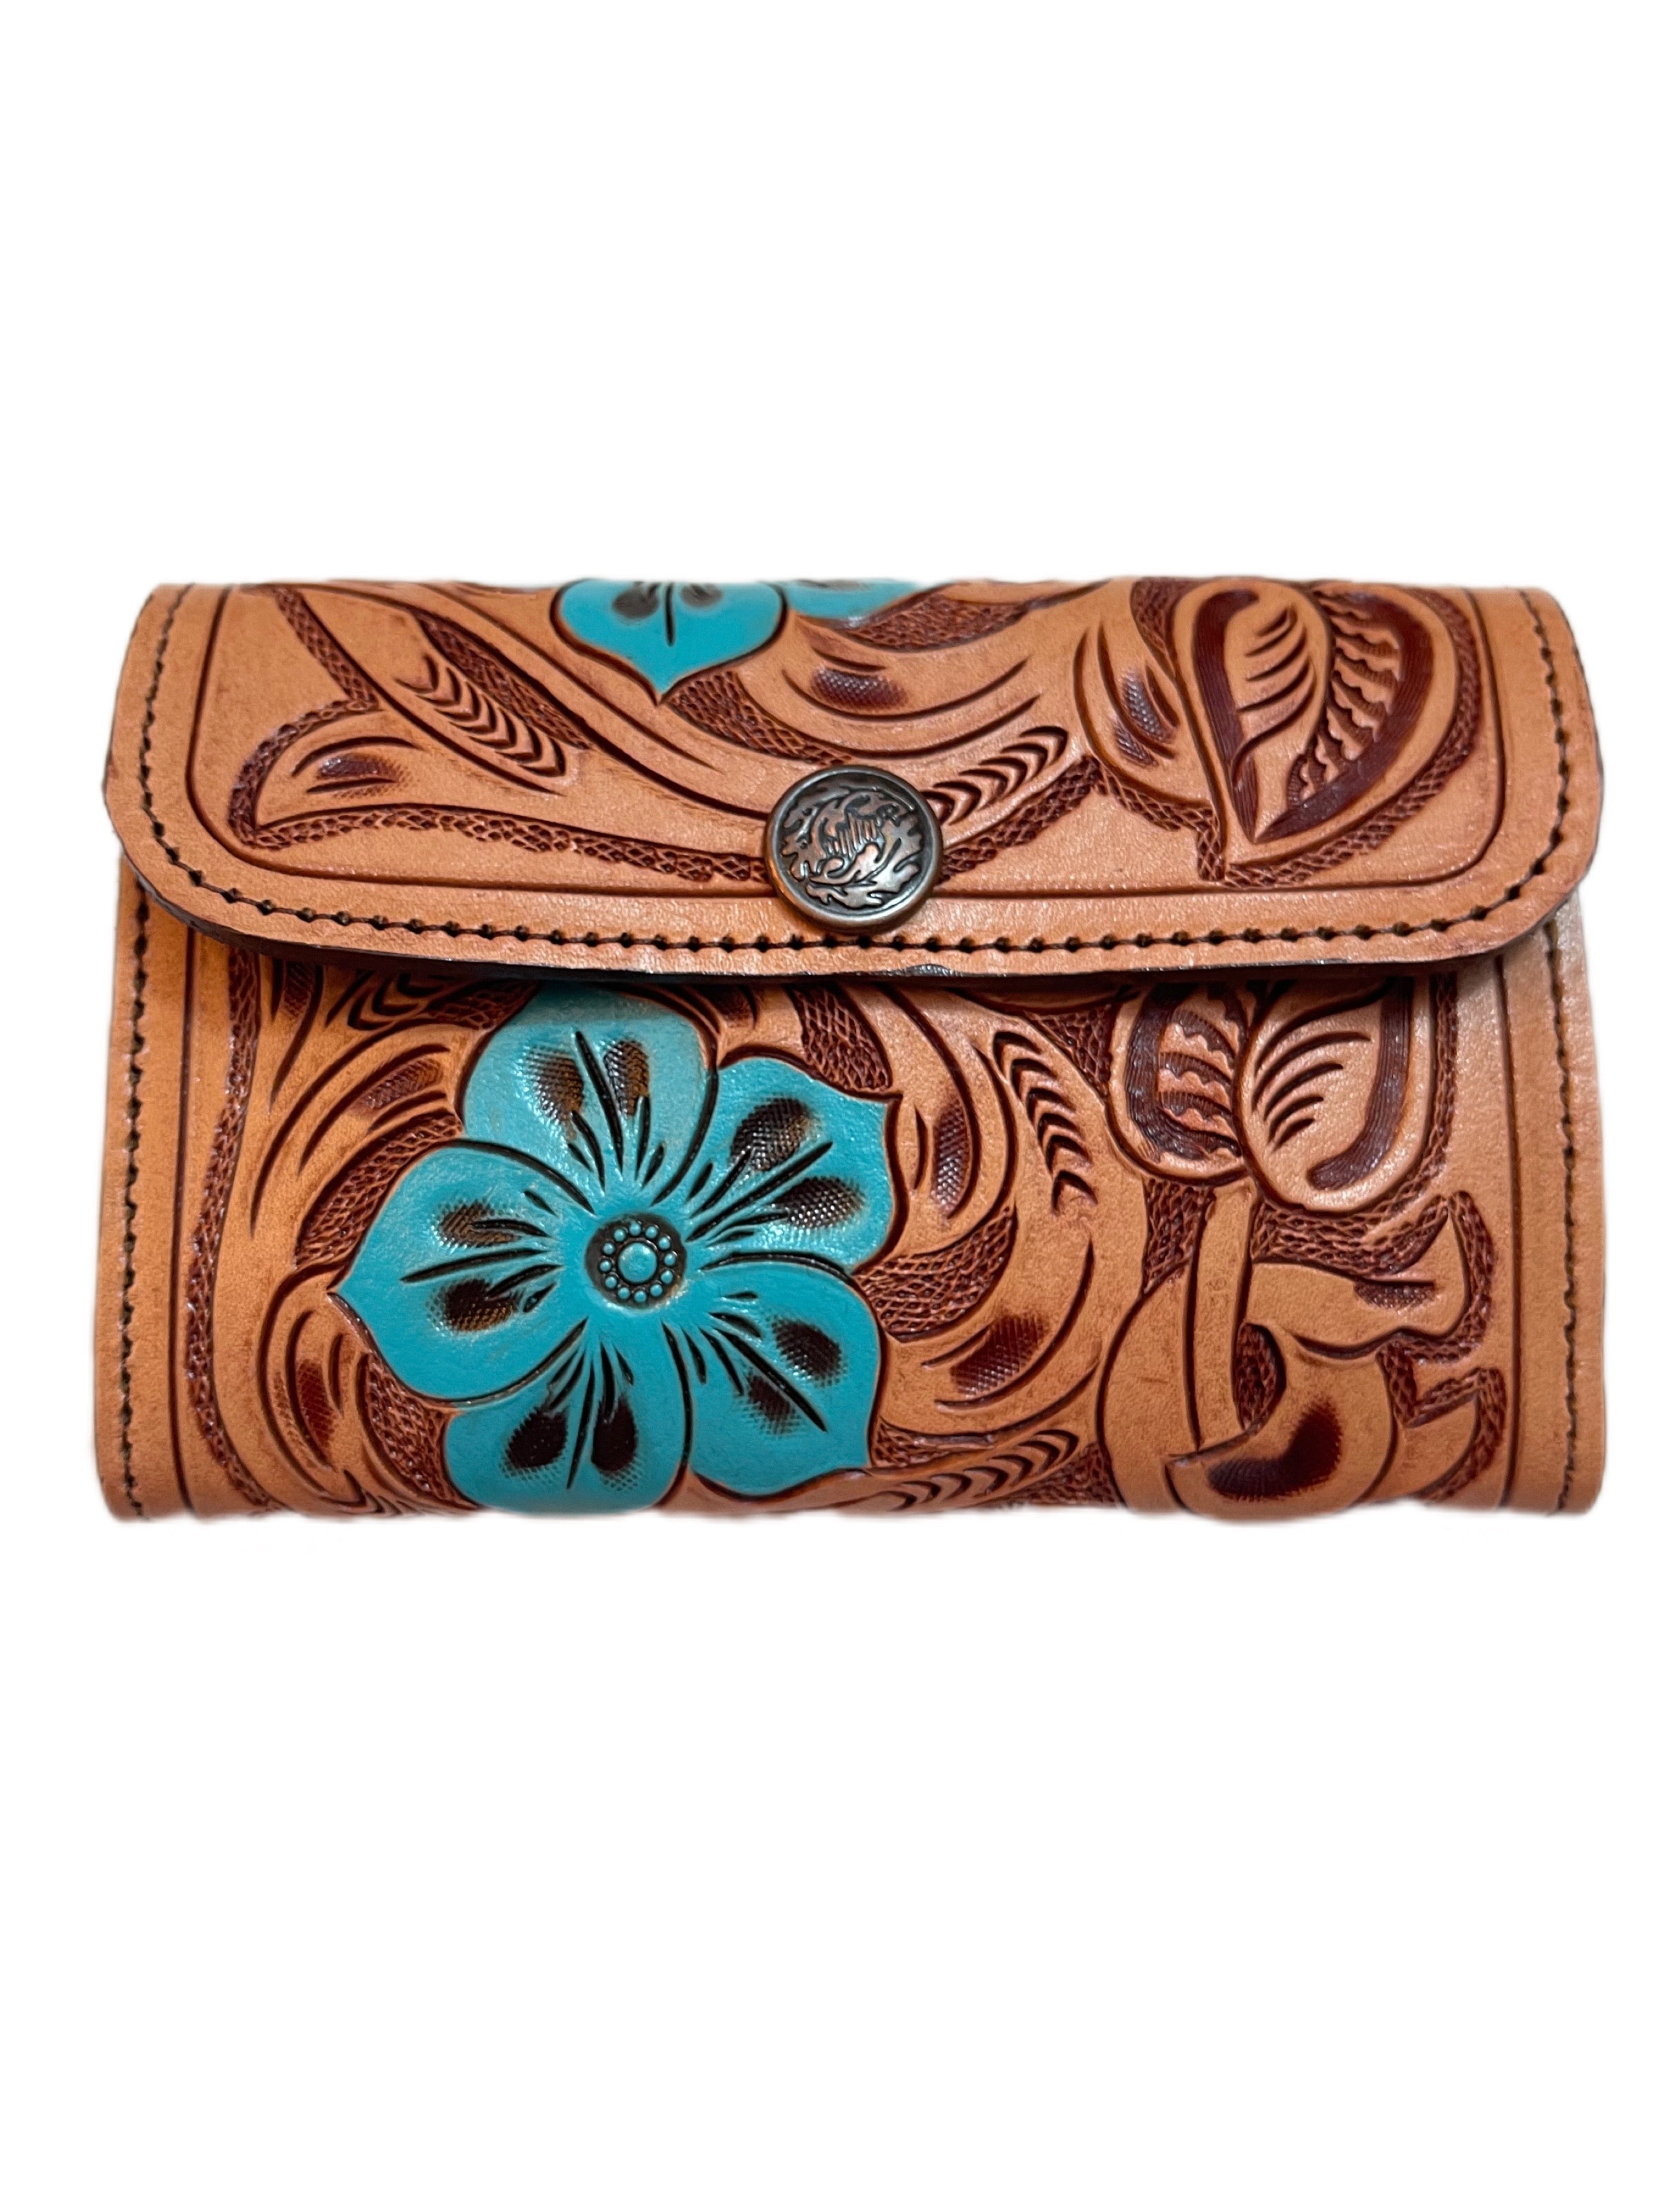 FLORAL WALLET - TAN & TURQUOISE BLUE